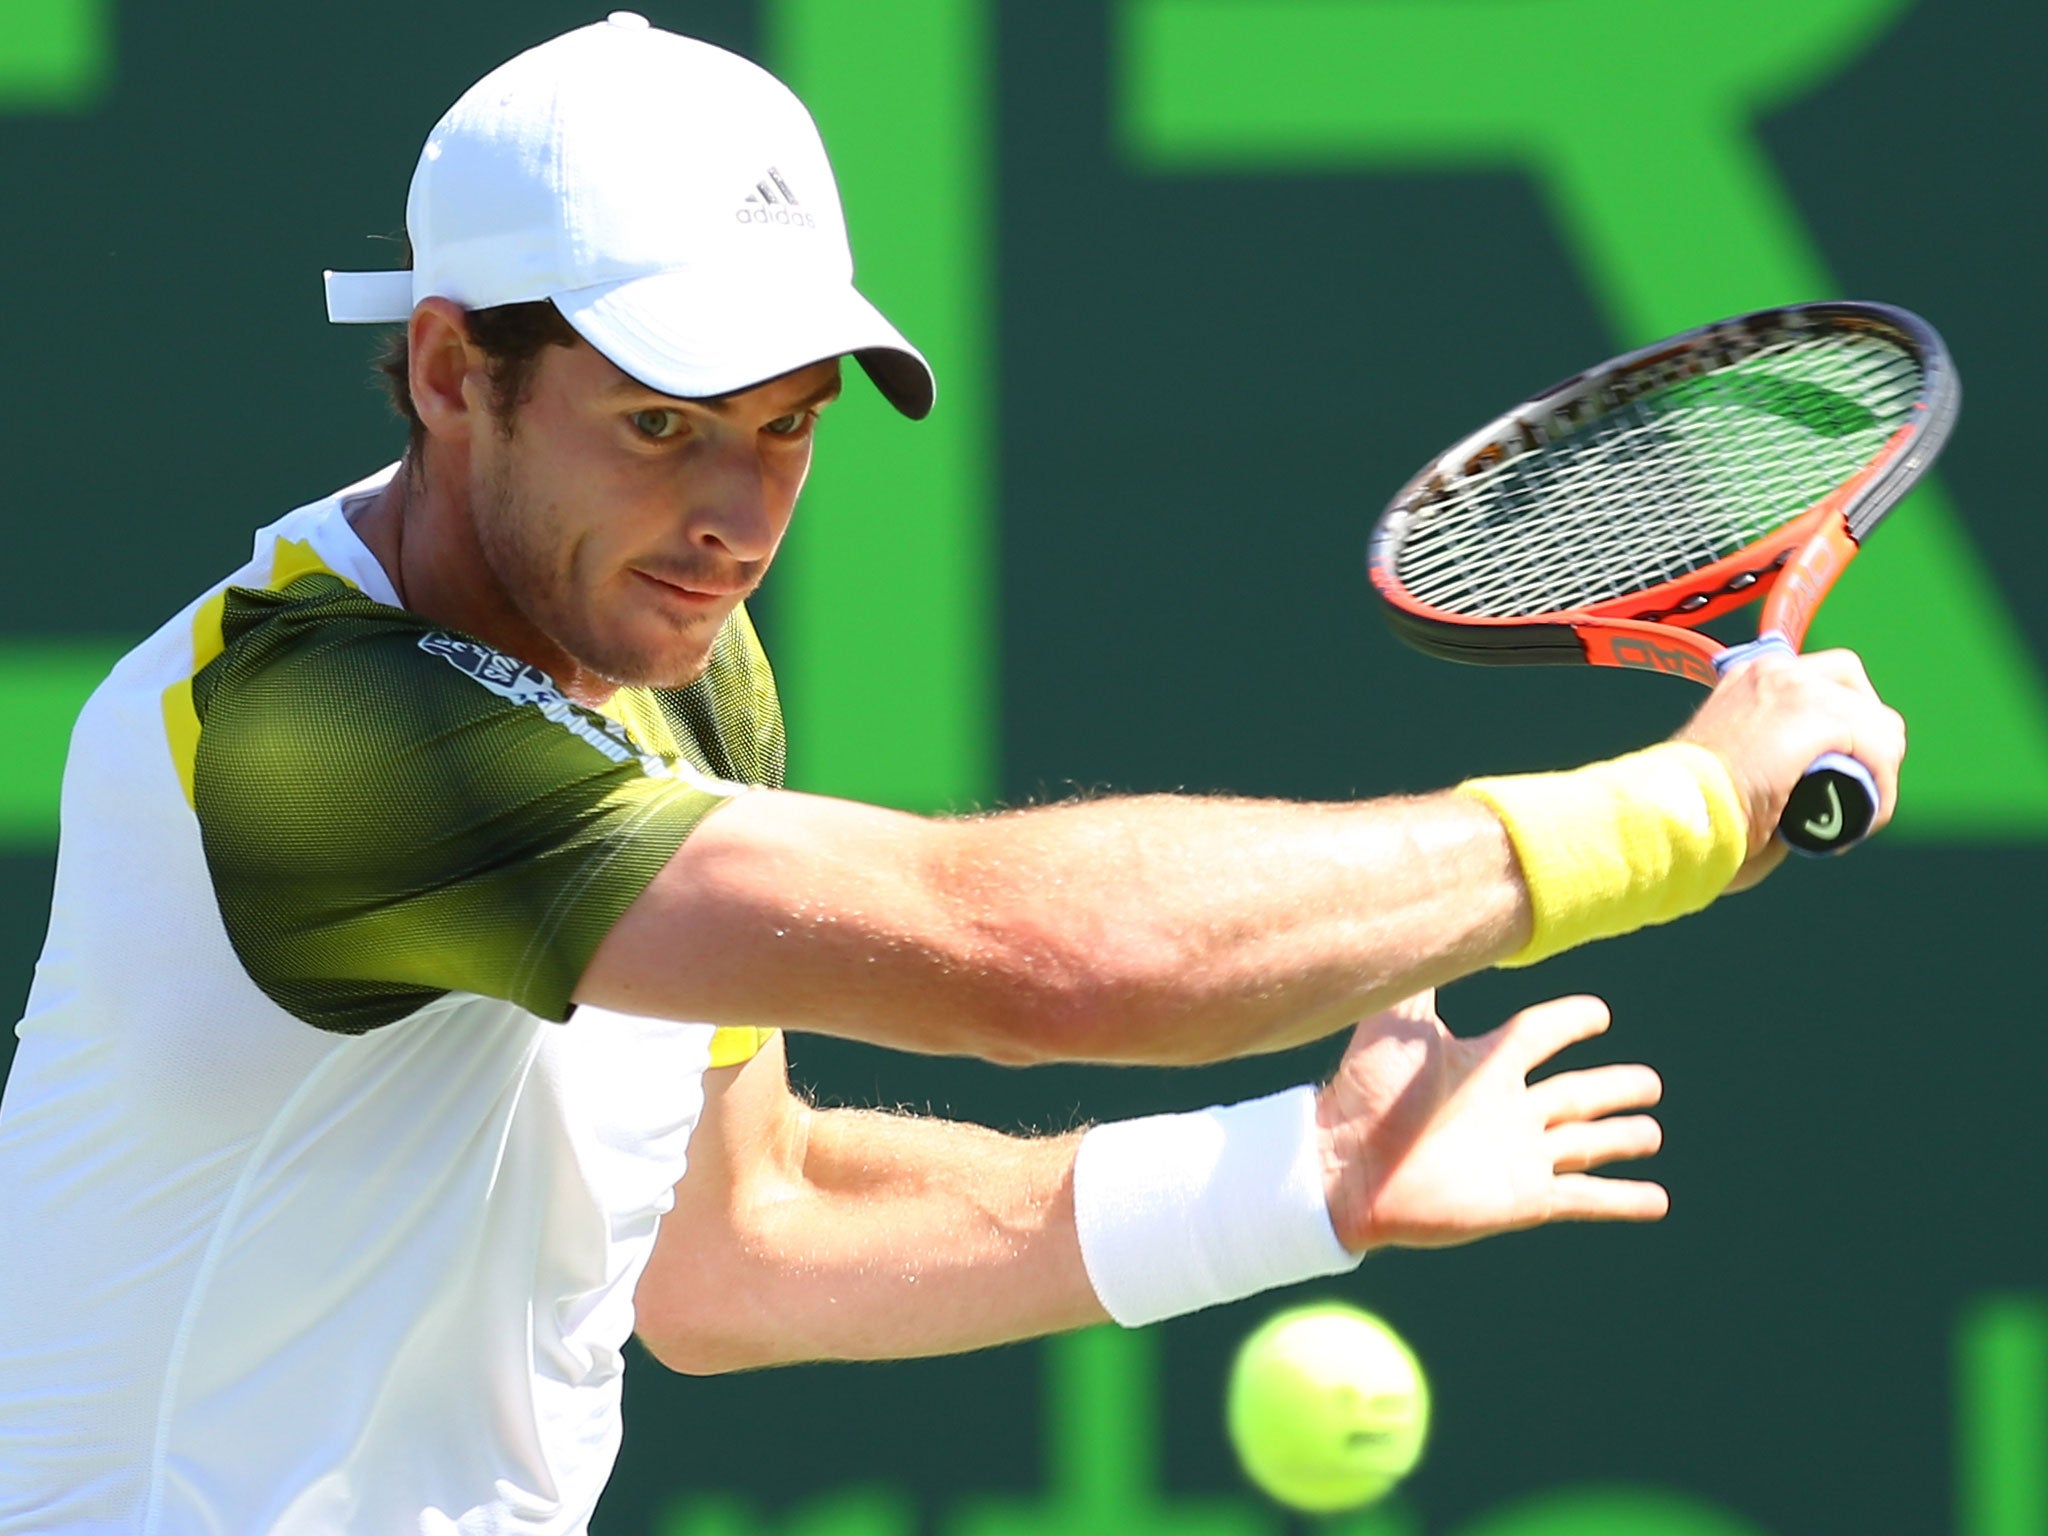 Andy Murray beat Marin Cilic in just under two hours